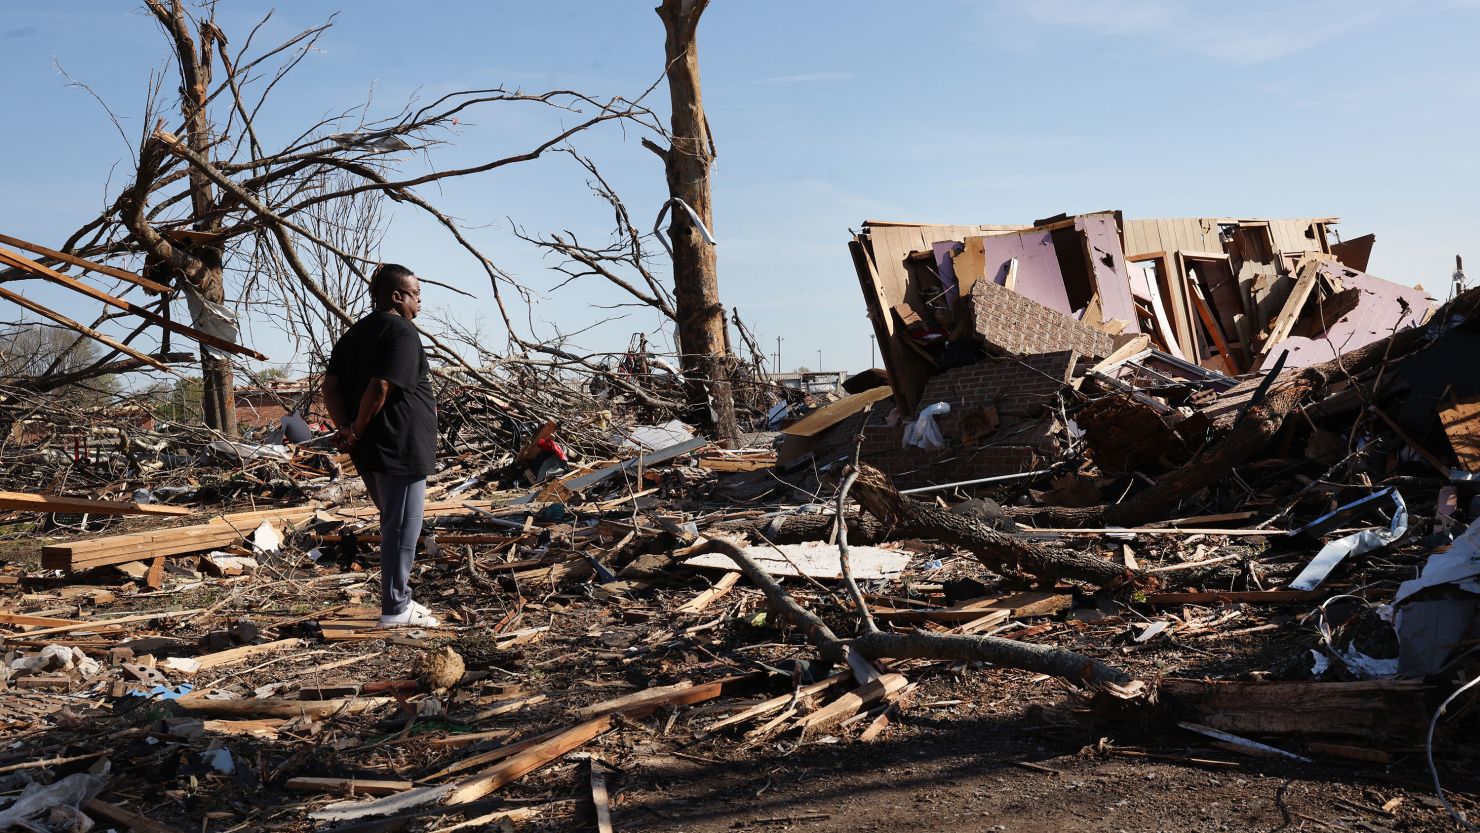 Cornelius Williams looks at what remains of the home in which he grew up after it was hit on Friday evening by an EF-4 tornado on March 26, 2023 in Rolling Fork, Mississippi.